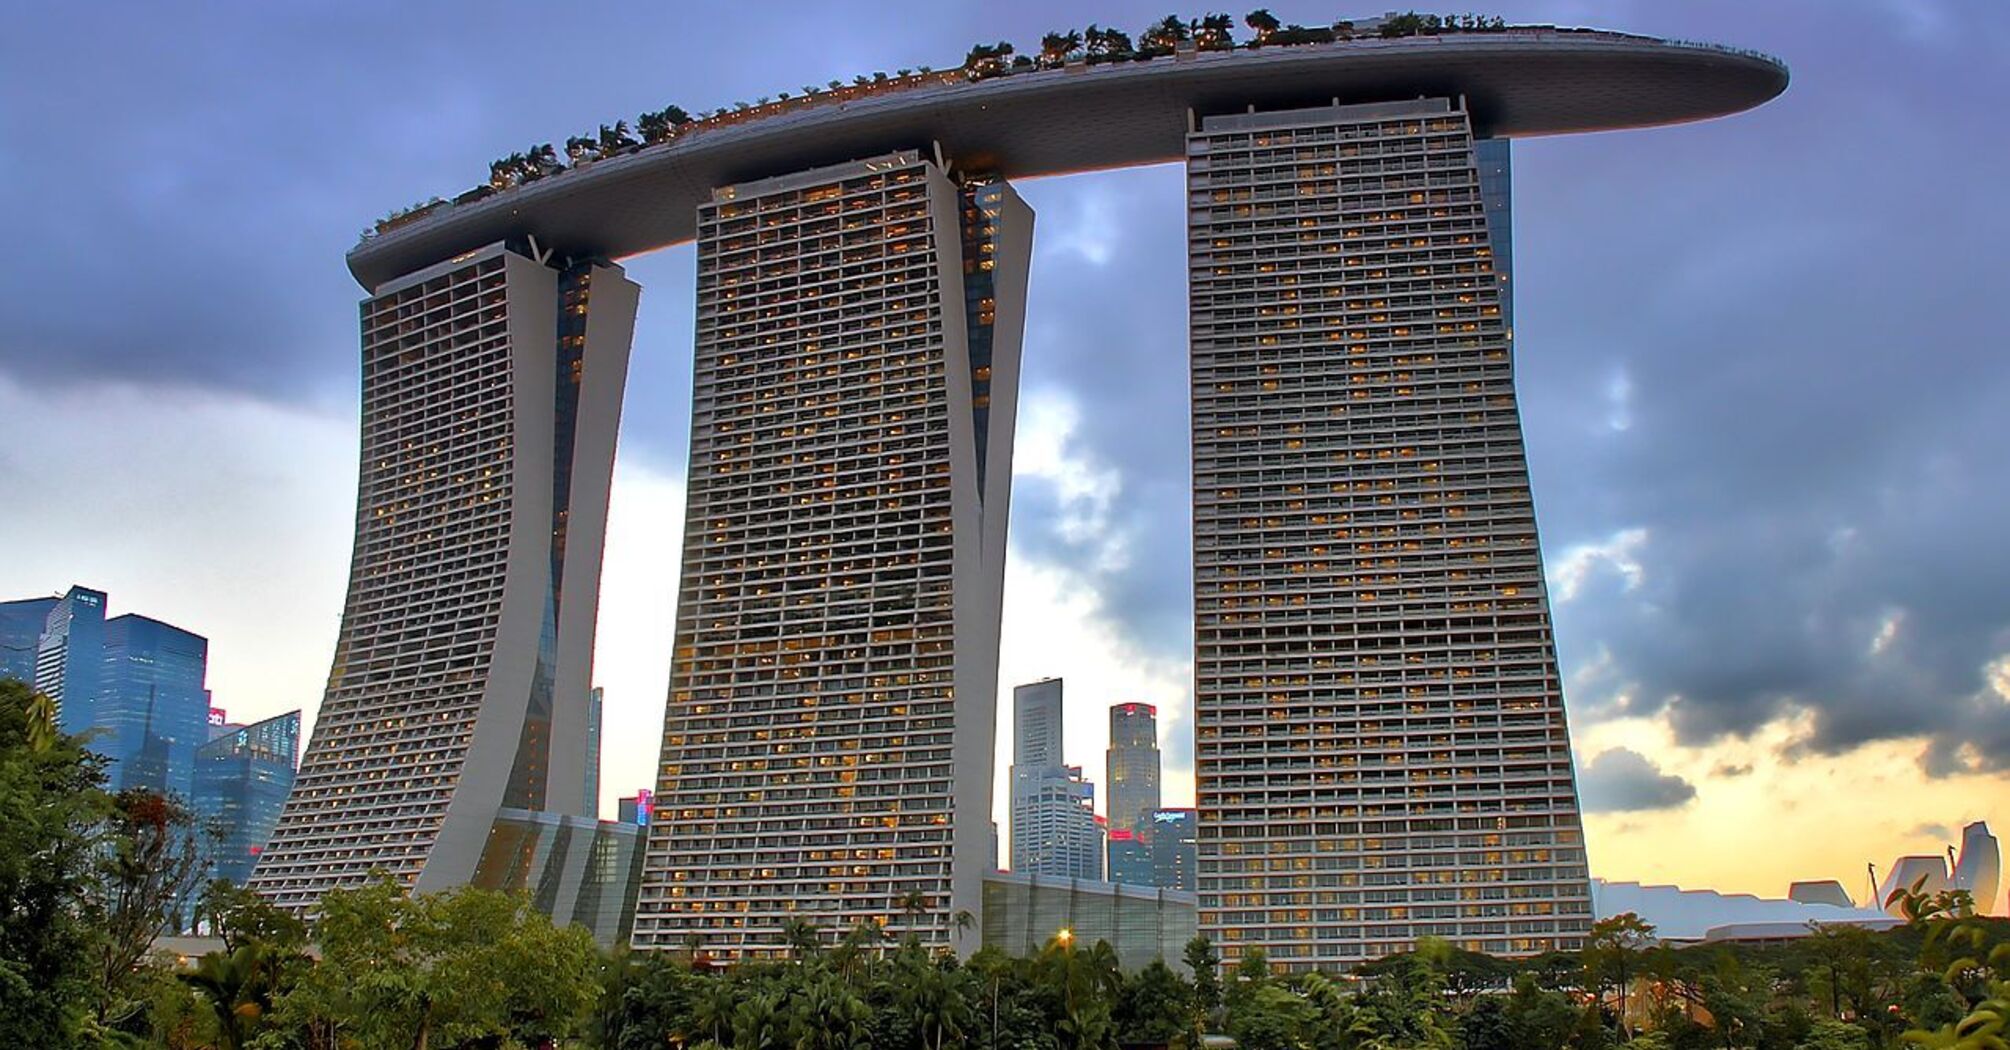 Marina Bay Sands is investing $750 million in the next phase of hotel construction